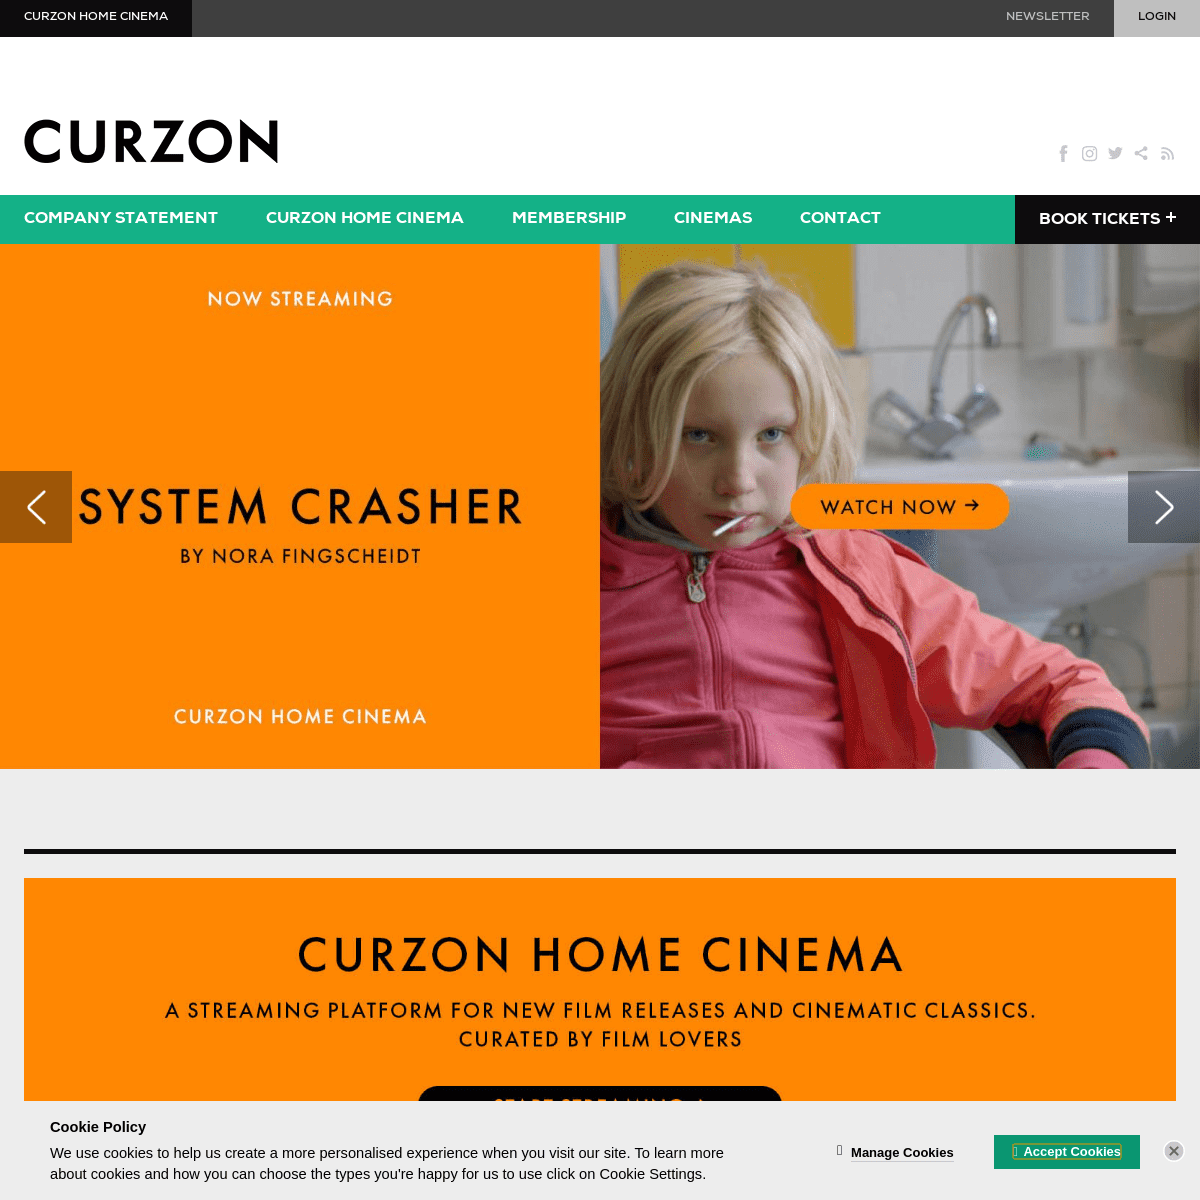 A complete backup of curzoncinemas.com